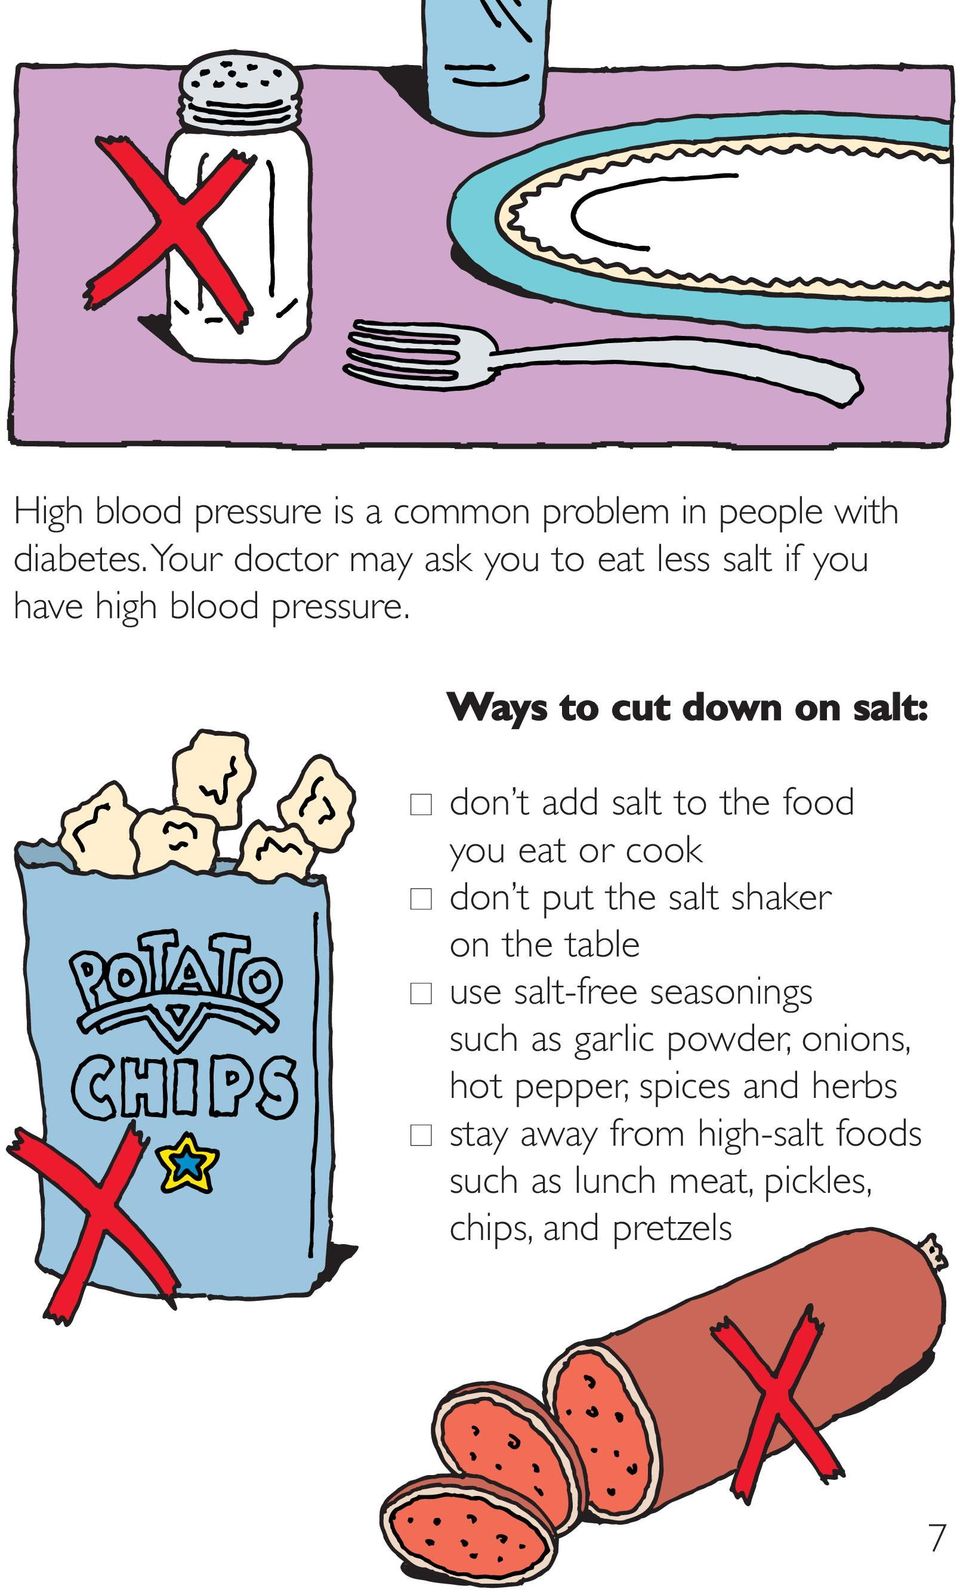 Ways to cut down on salt: don t add salt to the food you eat or cook don t put the salt shaker on the